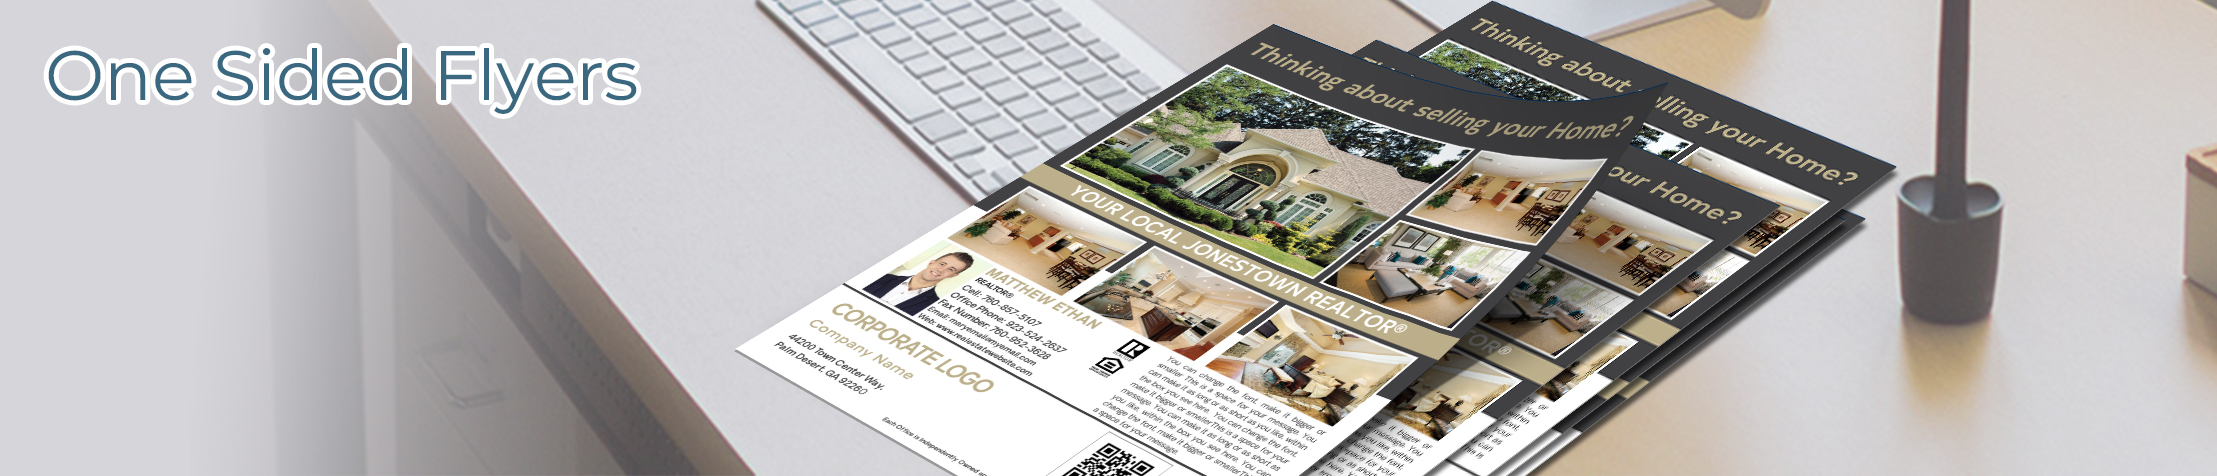 Century 21 Real Estate Flyers and Brochures - Century 21 one-sided flyer templates for open houses and marketing | BestPrintBuy.com